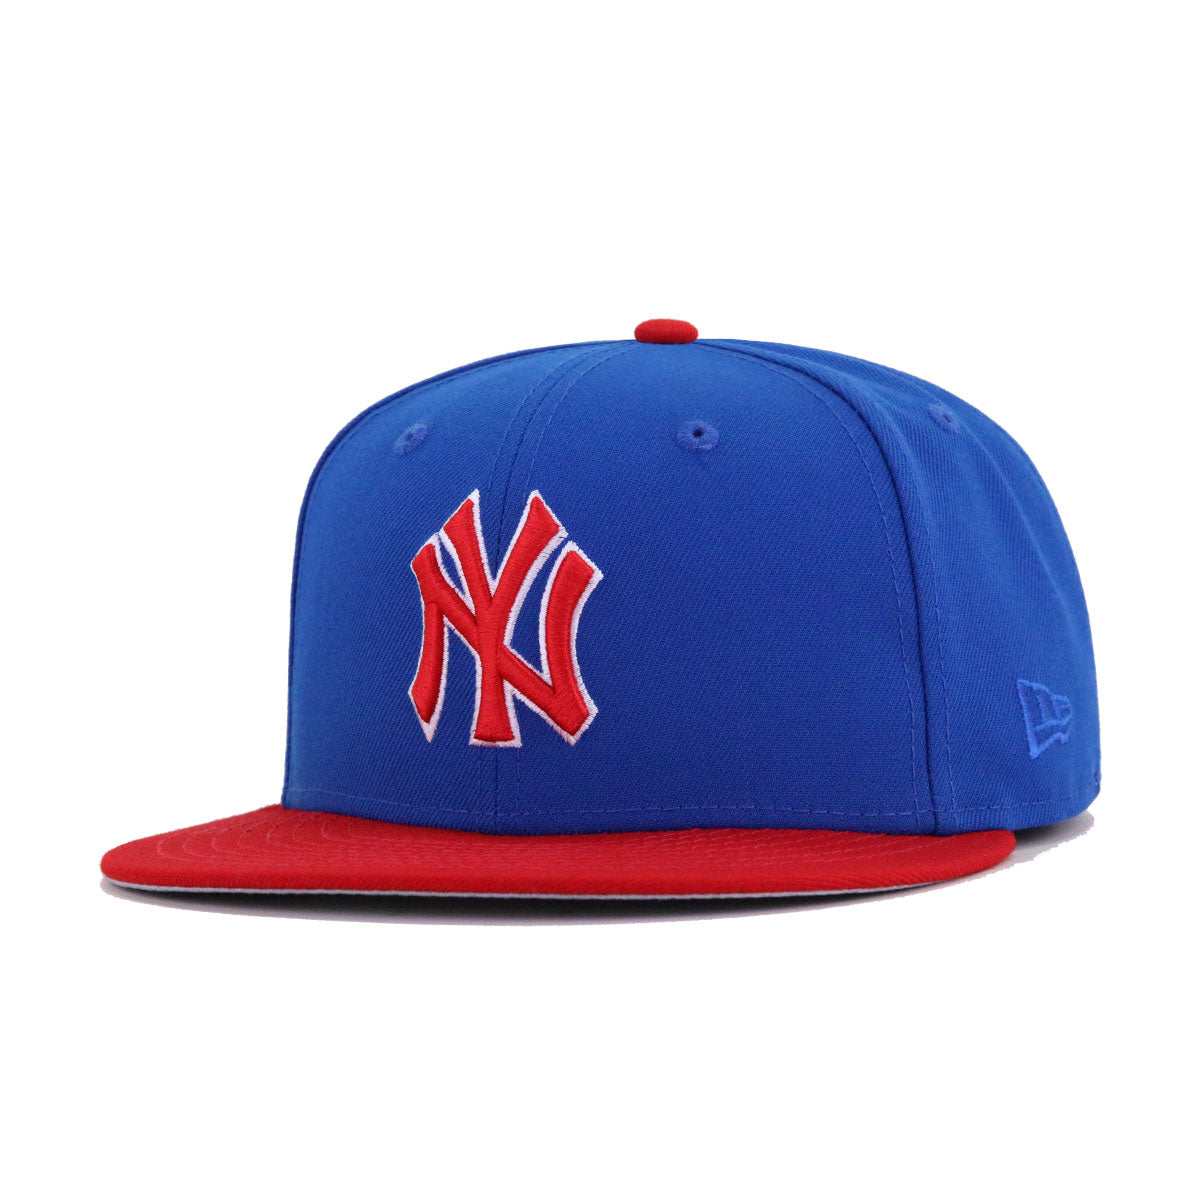 New York Yankees Light Royal Blue Scarlet New Era 59Fifty Fitted